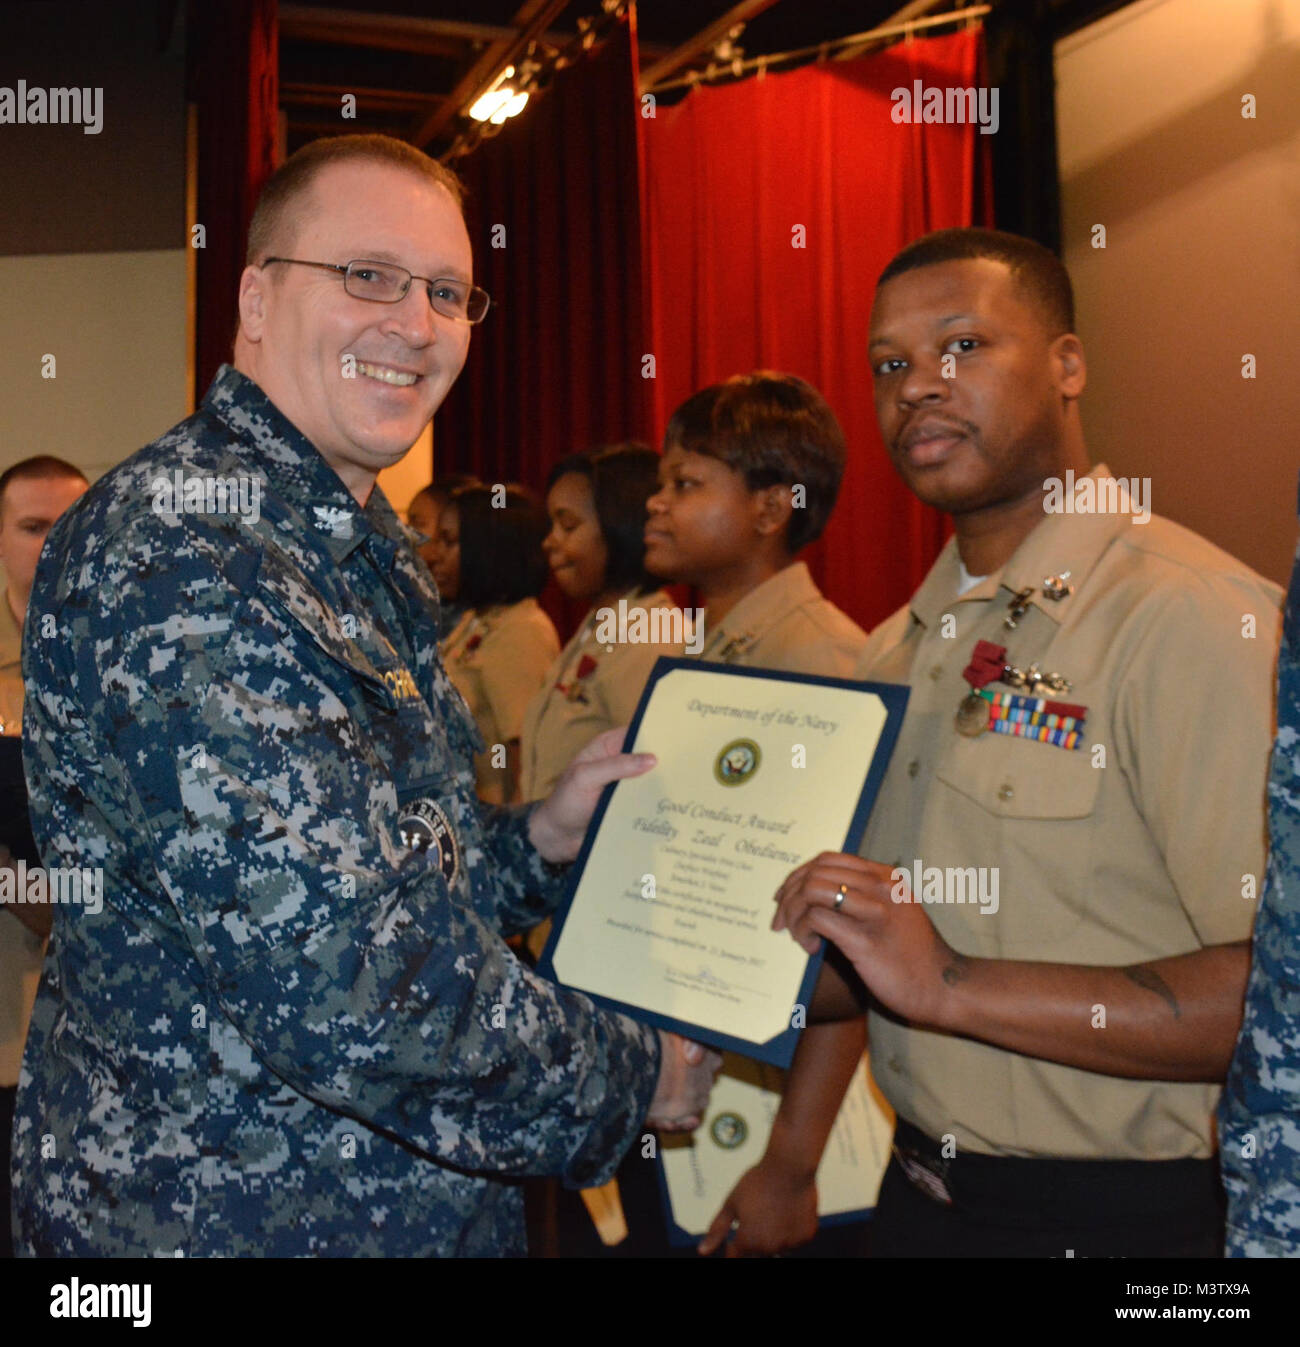 170208-N-SP496-016 SILVERDALE, Wash. (Feb. 8, 2017) – Capt. Alan Schrader (left), Naval Base Kitsap (NBK) commanding officer, presents Culinary Specialist 1st Class Jonathan Yates with the Good Conduct Medal during an all-hands call held at the NBK-Bangor Theater. More than 30 awards and decorations were bestowed to NBK personnel during the event. (U.S. Navy photo by Petty Officer 3rd Class Jane Wood/Released) 170208-N-SP496-016 by Naval Base Kitsap (NBK) Stock Photo